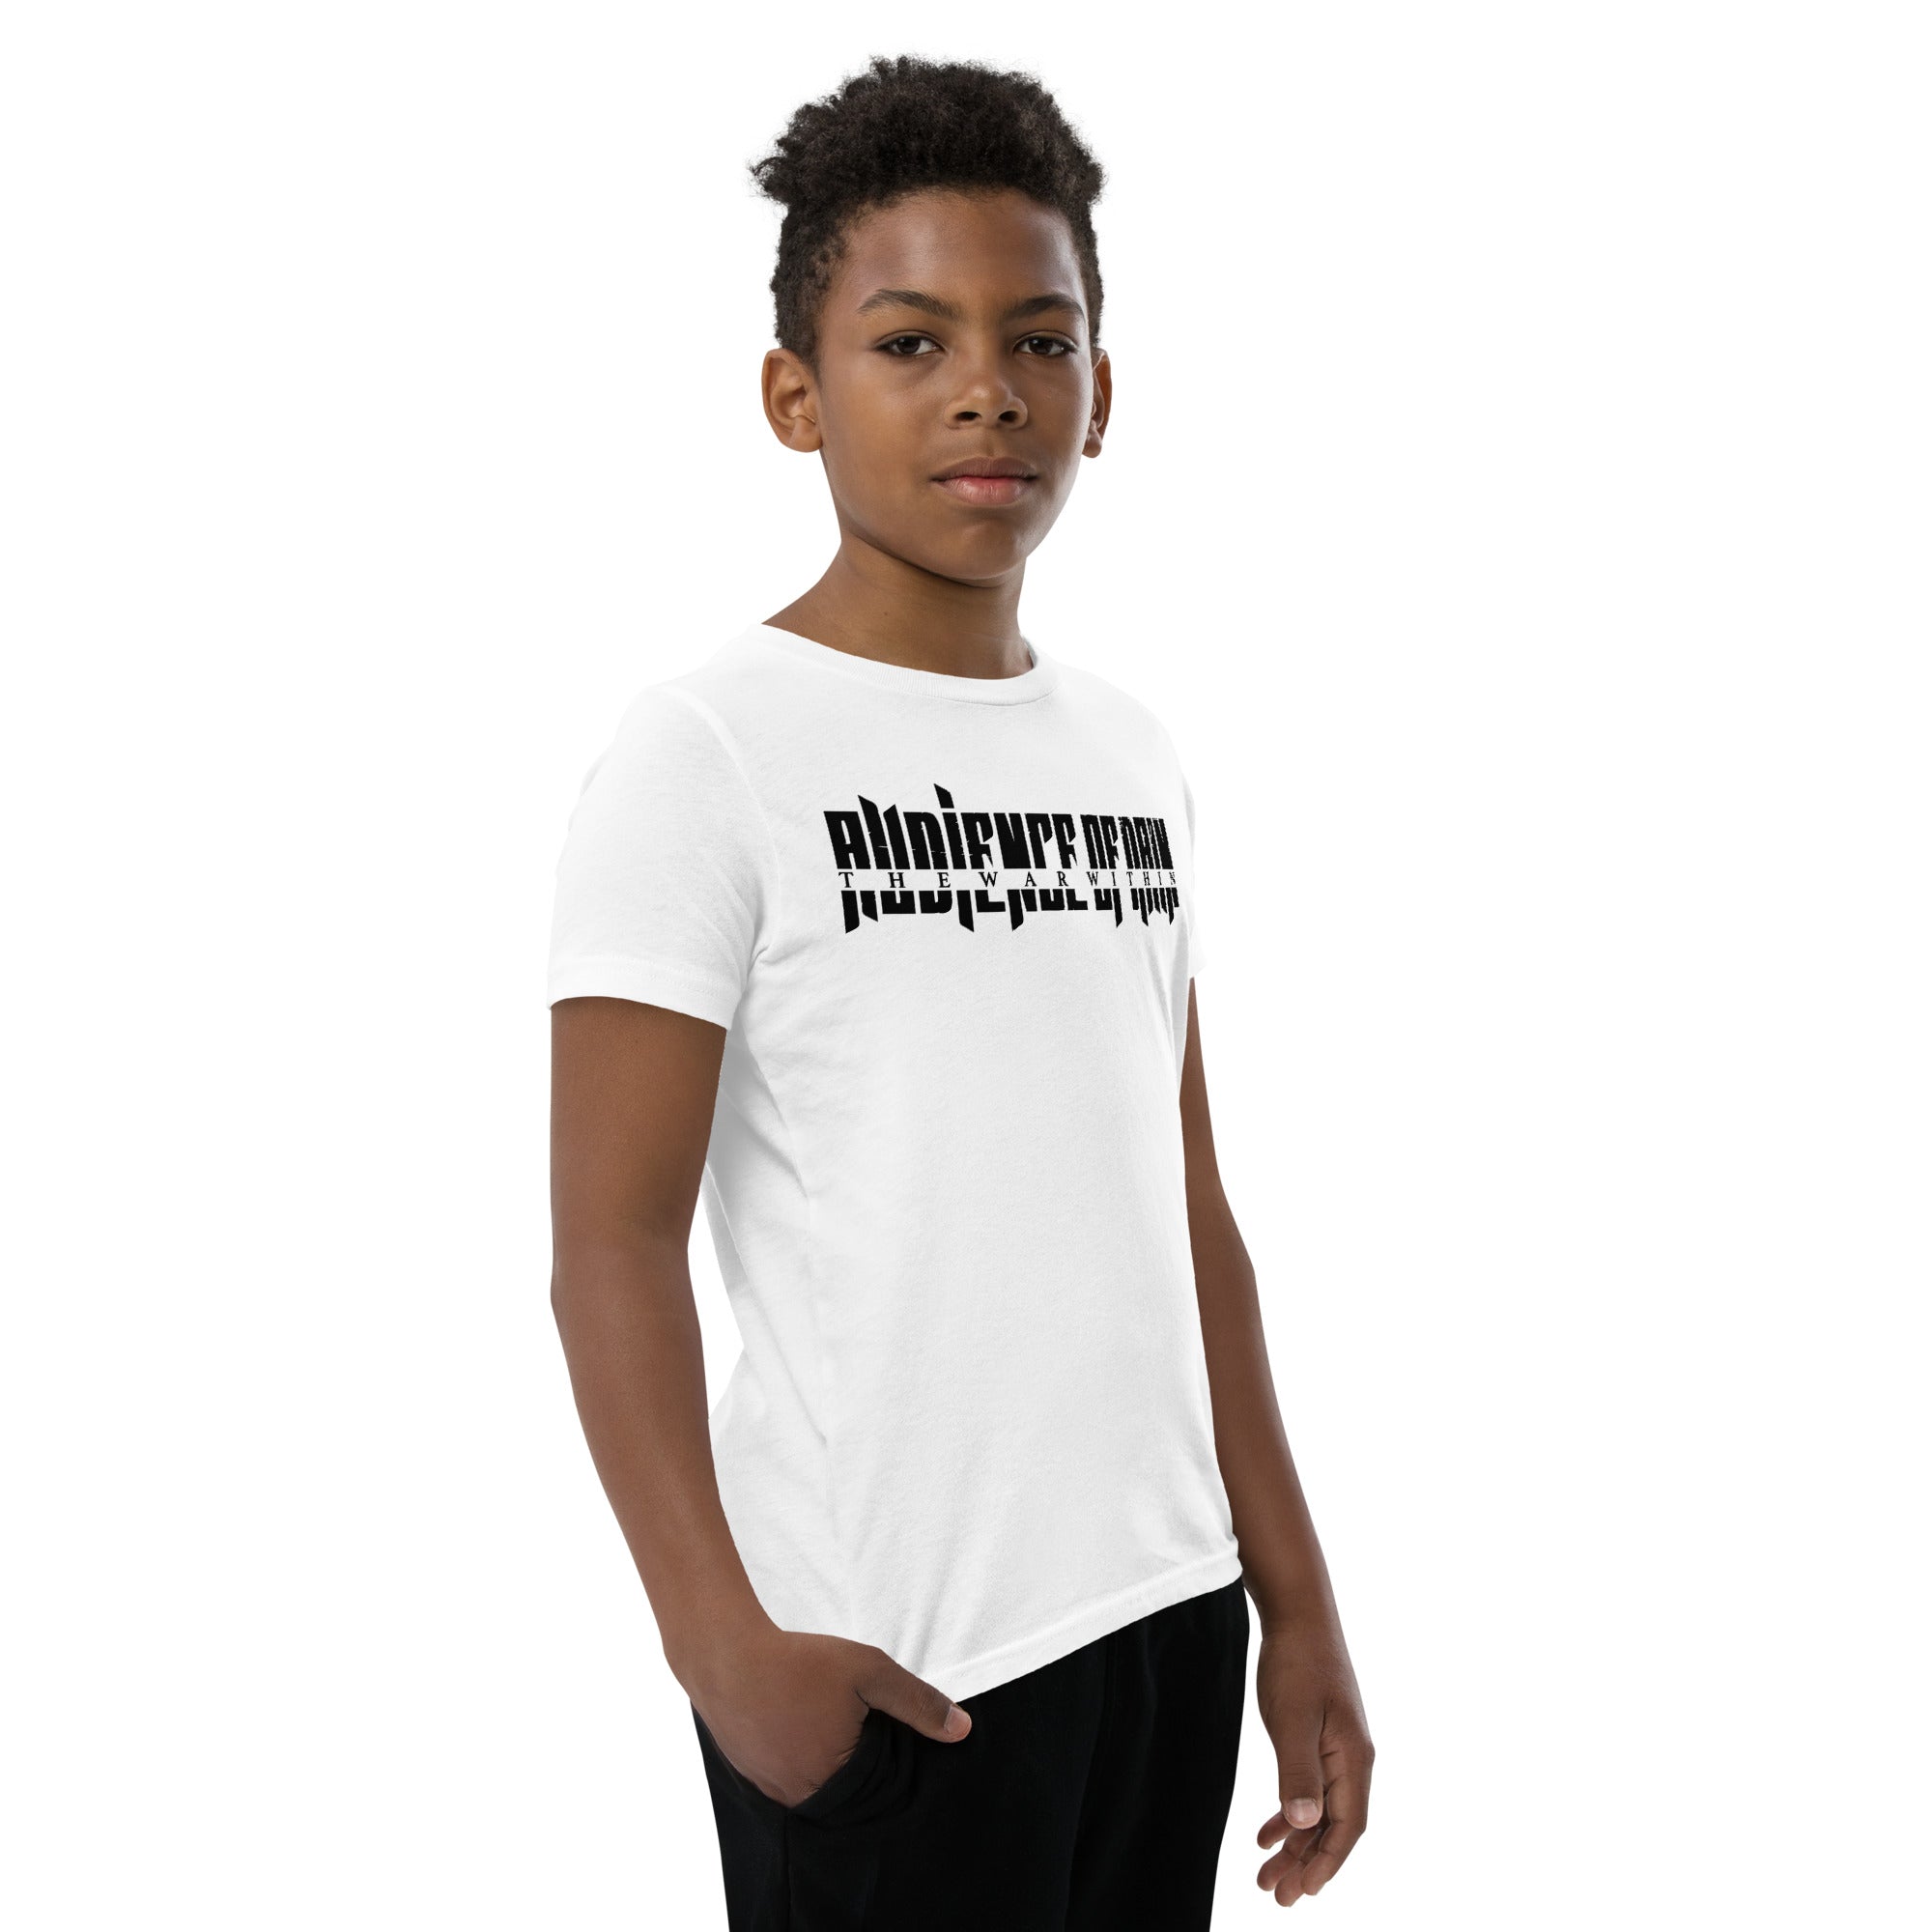 AUDIENCE OF RAIN - THE WAR WITHIN - YOUTH SHORT SLEEVE TEE